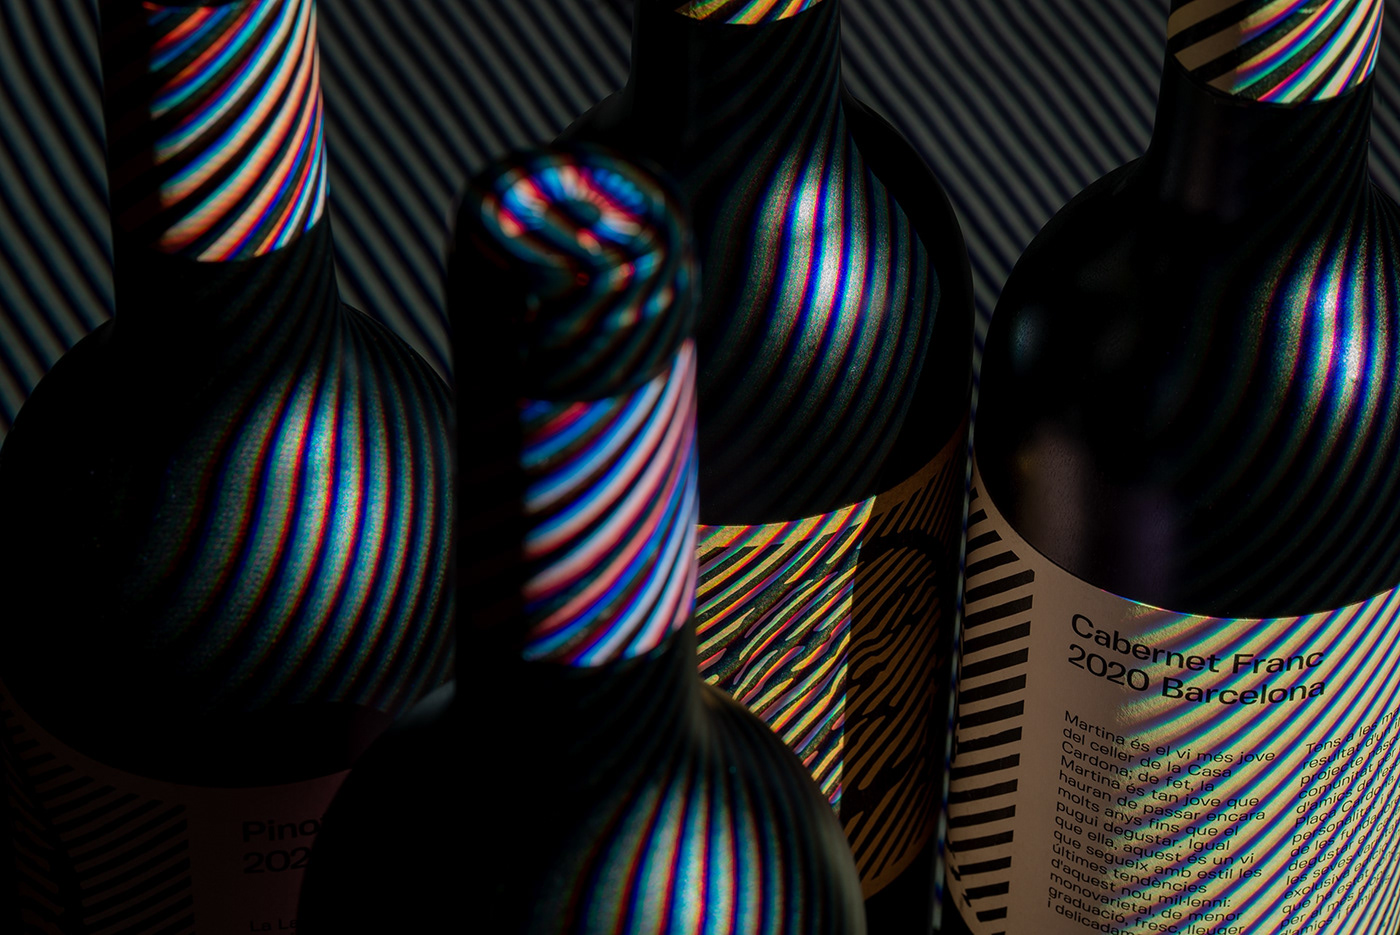 Casa Cardona wines. Group shot with diagonal stripes lighting effects over